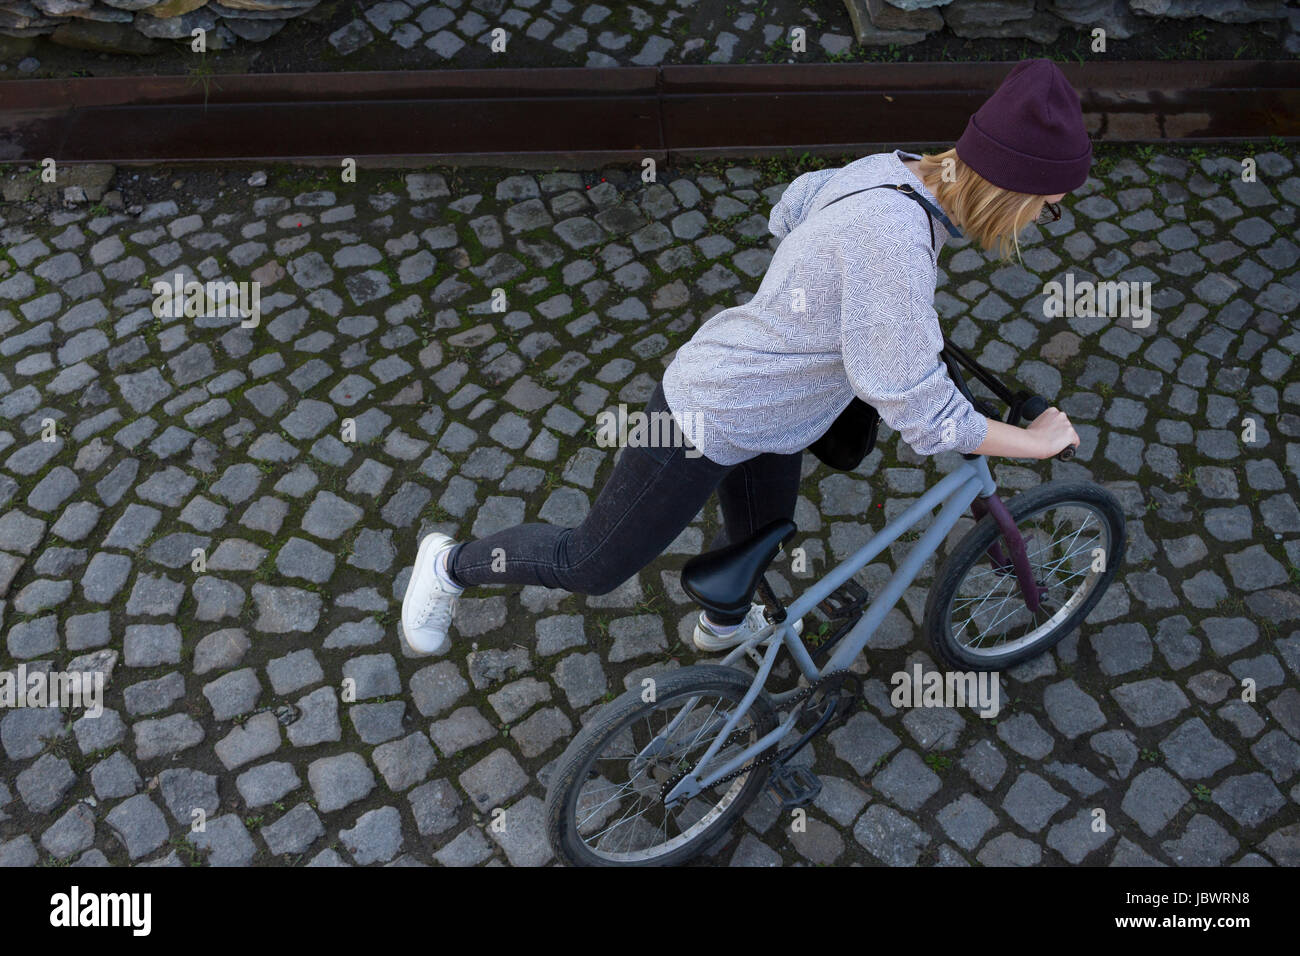 Overhead view of young woman mounting BMX bicycle in cobbled street Stock Photo